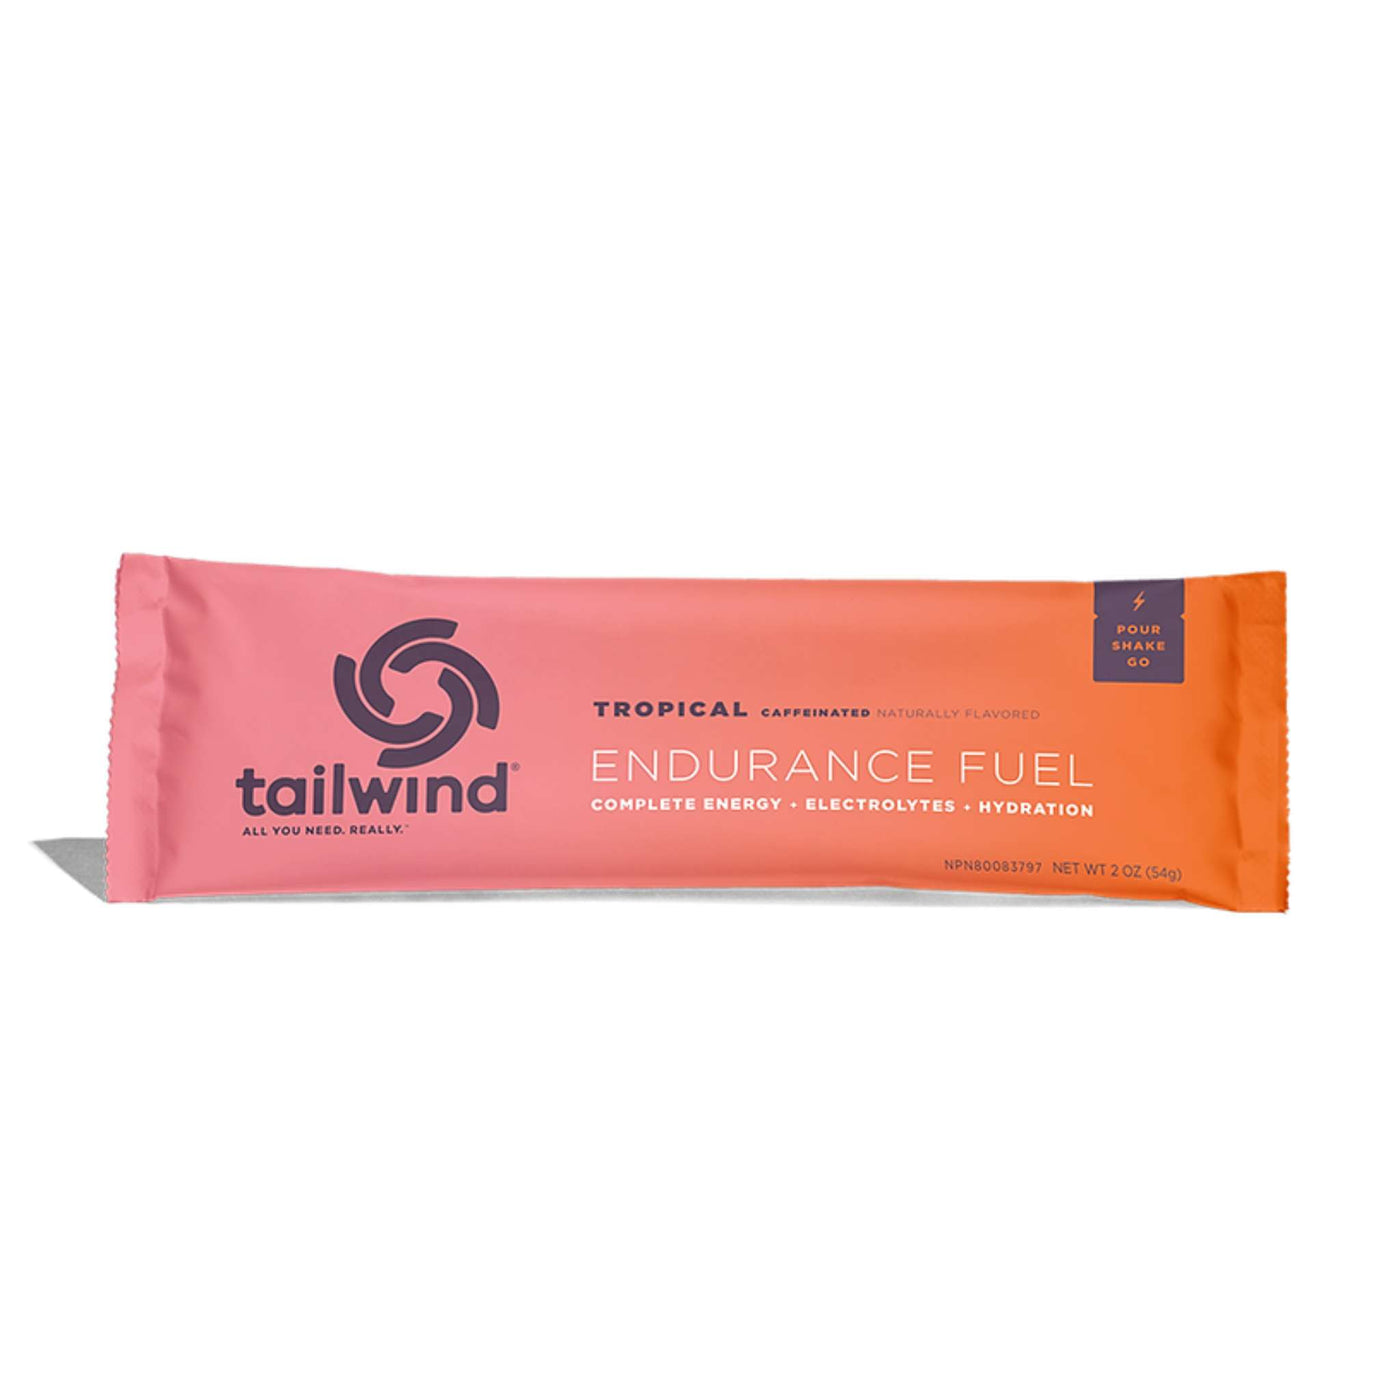 Tailwind Nutrition Endurance Fuel 54g | Tailwind NZ | Sports Nutrition & Electrolytes | Further Faster Christchurch NZ #tropical